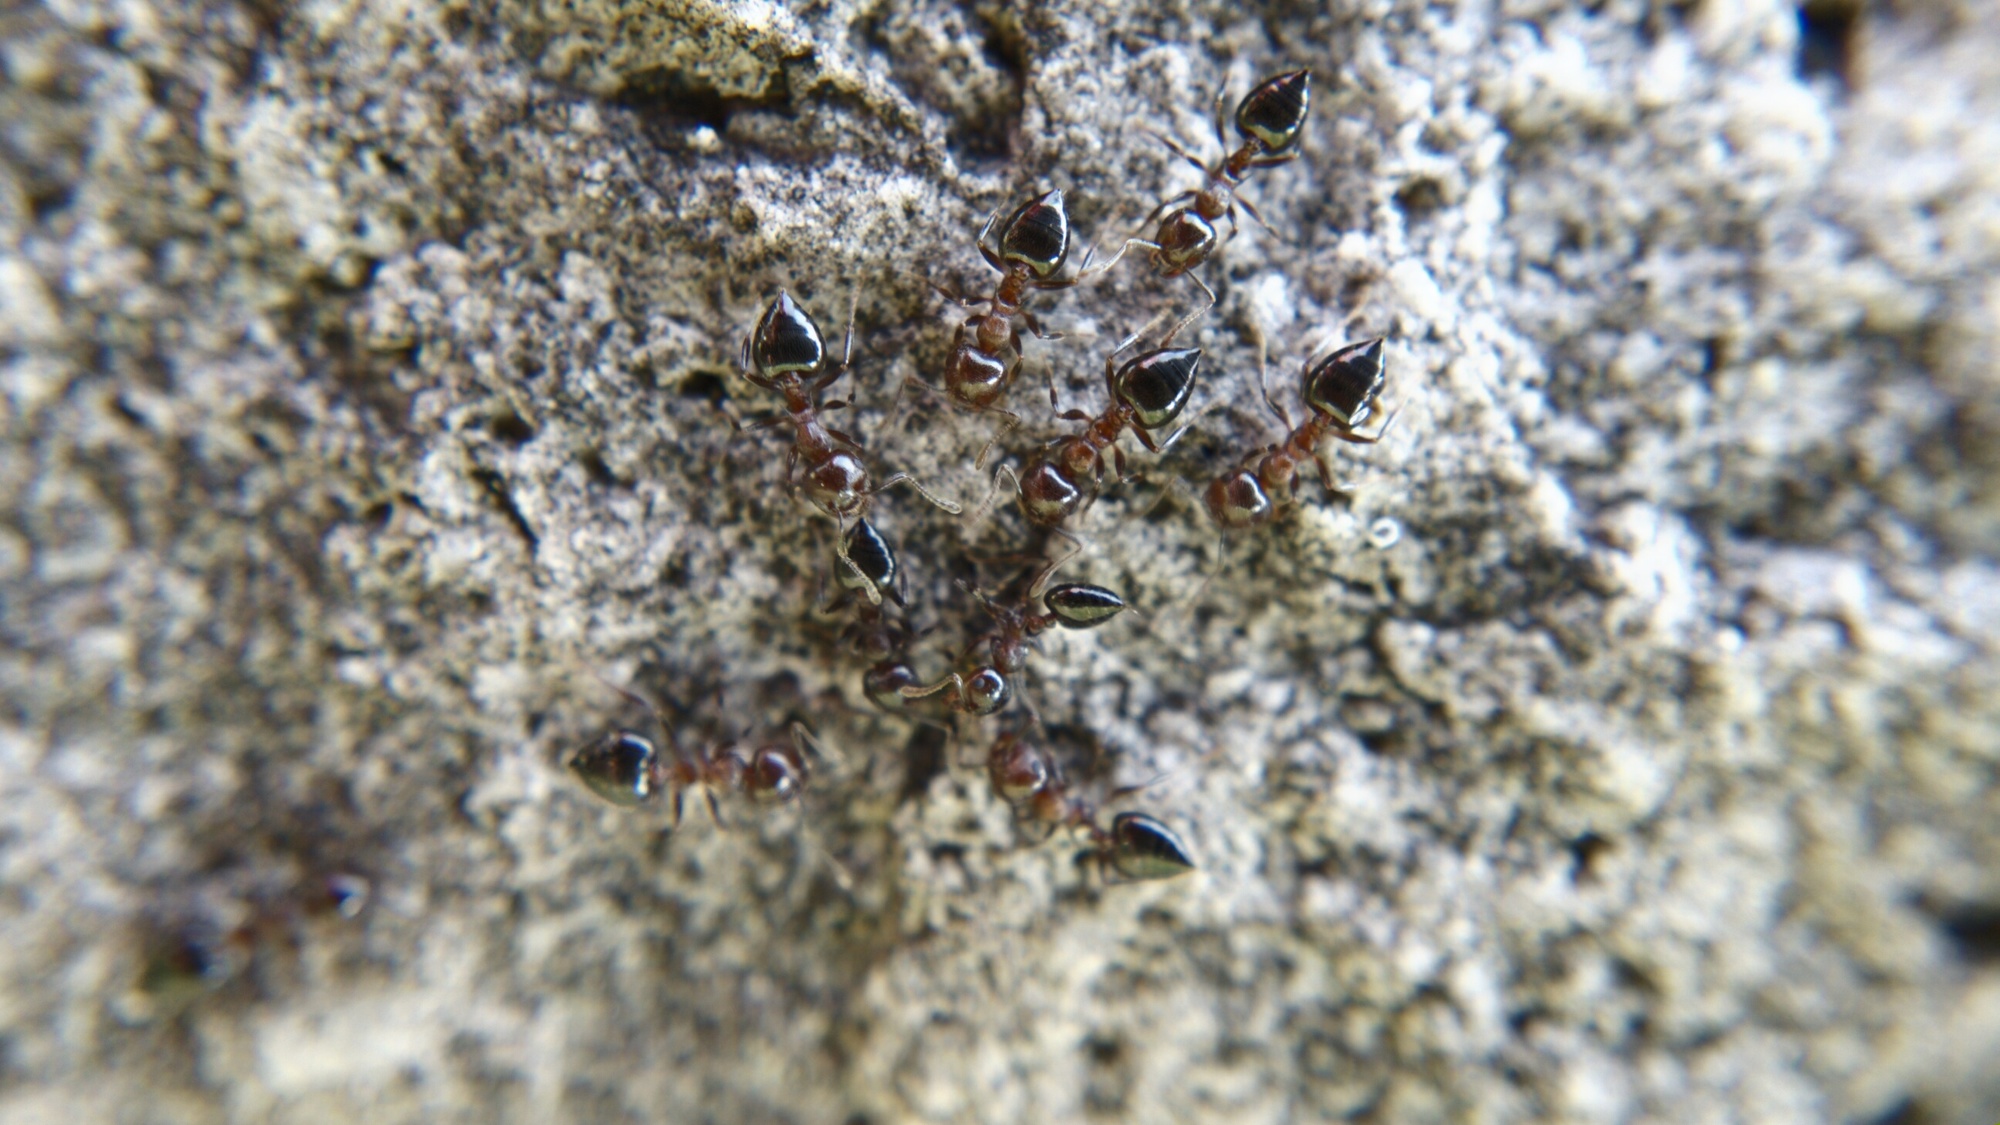 A group of Crematogaster ants